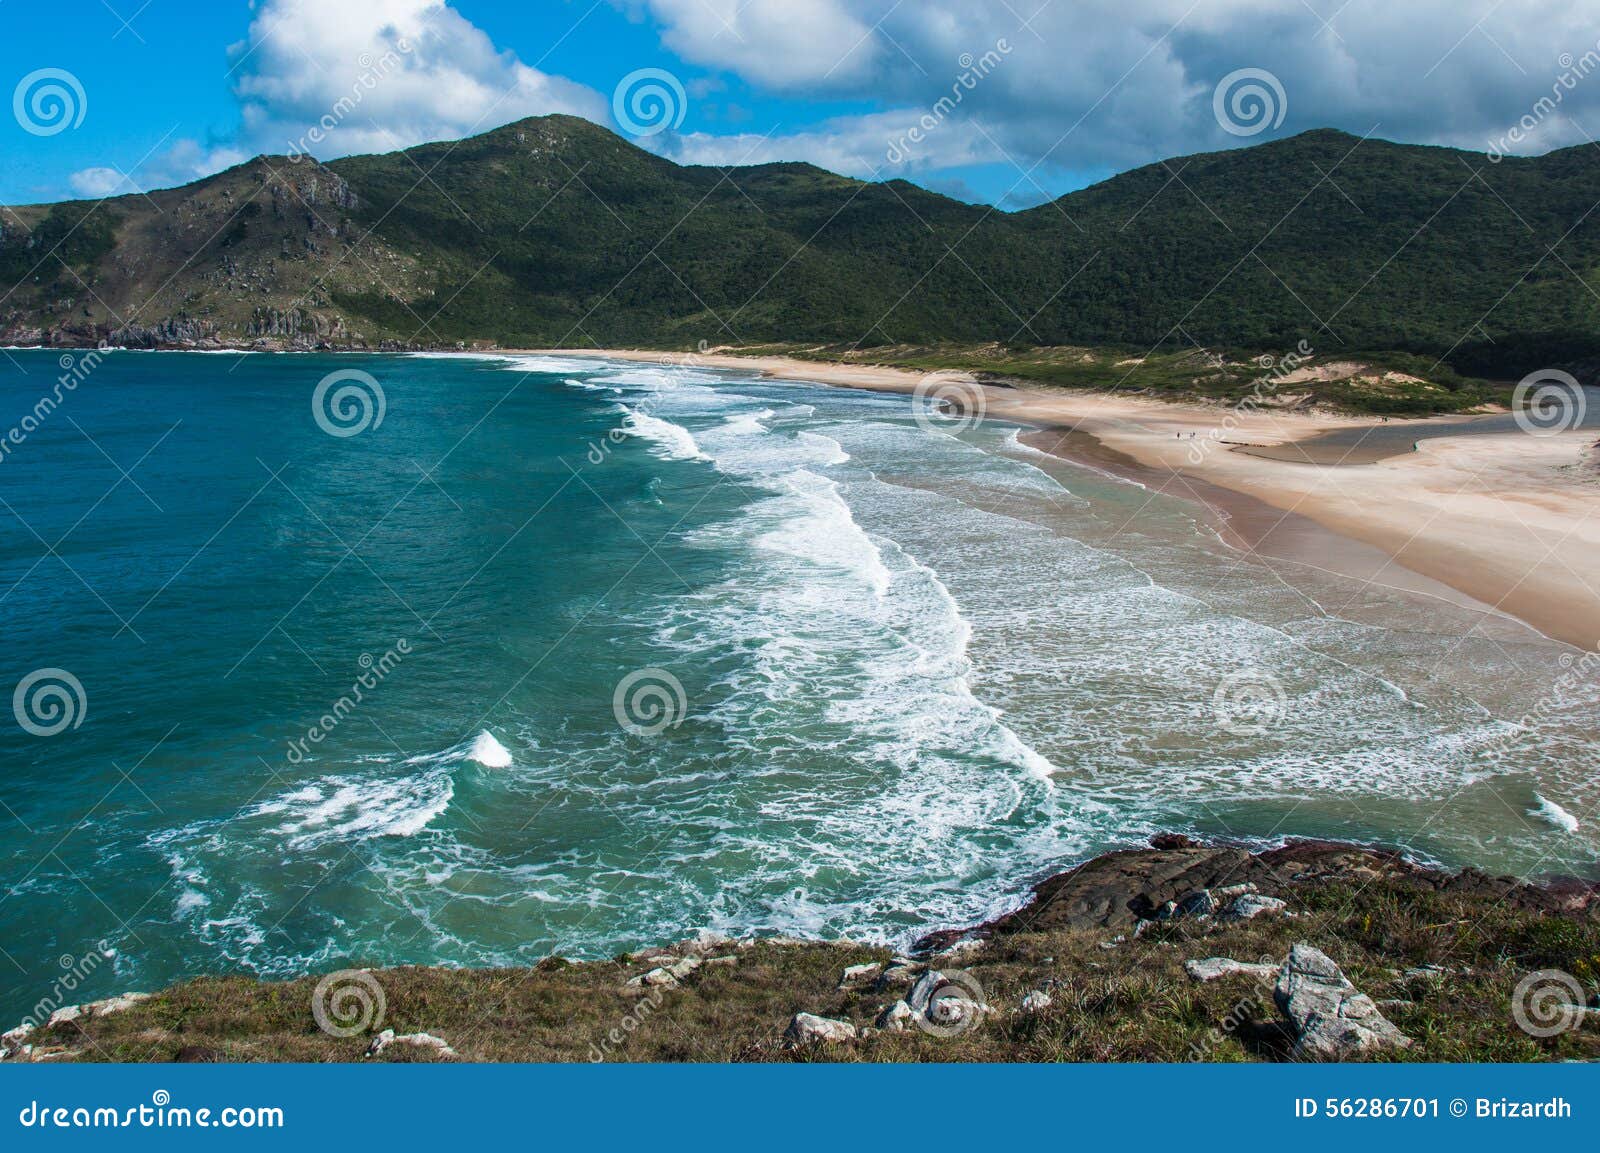 beaches in florianopolis island, in south brazil